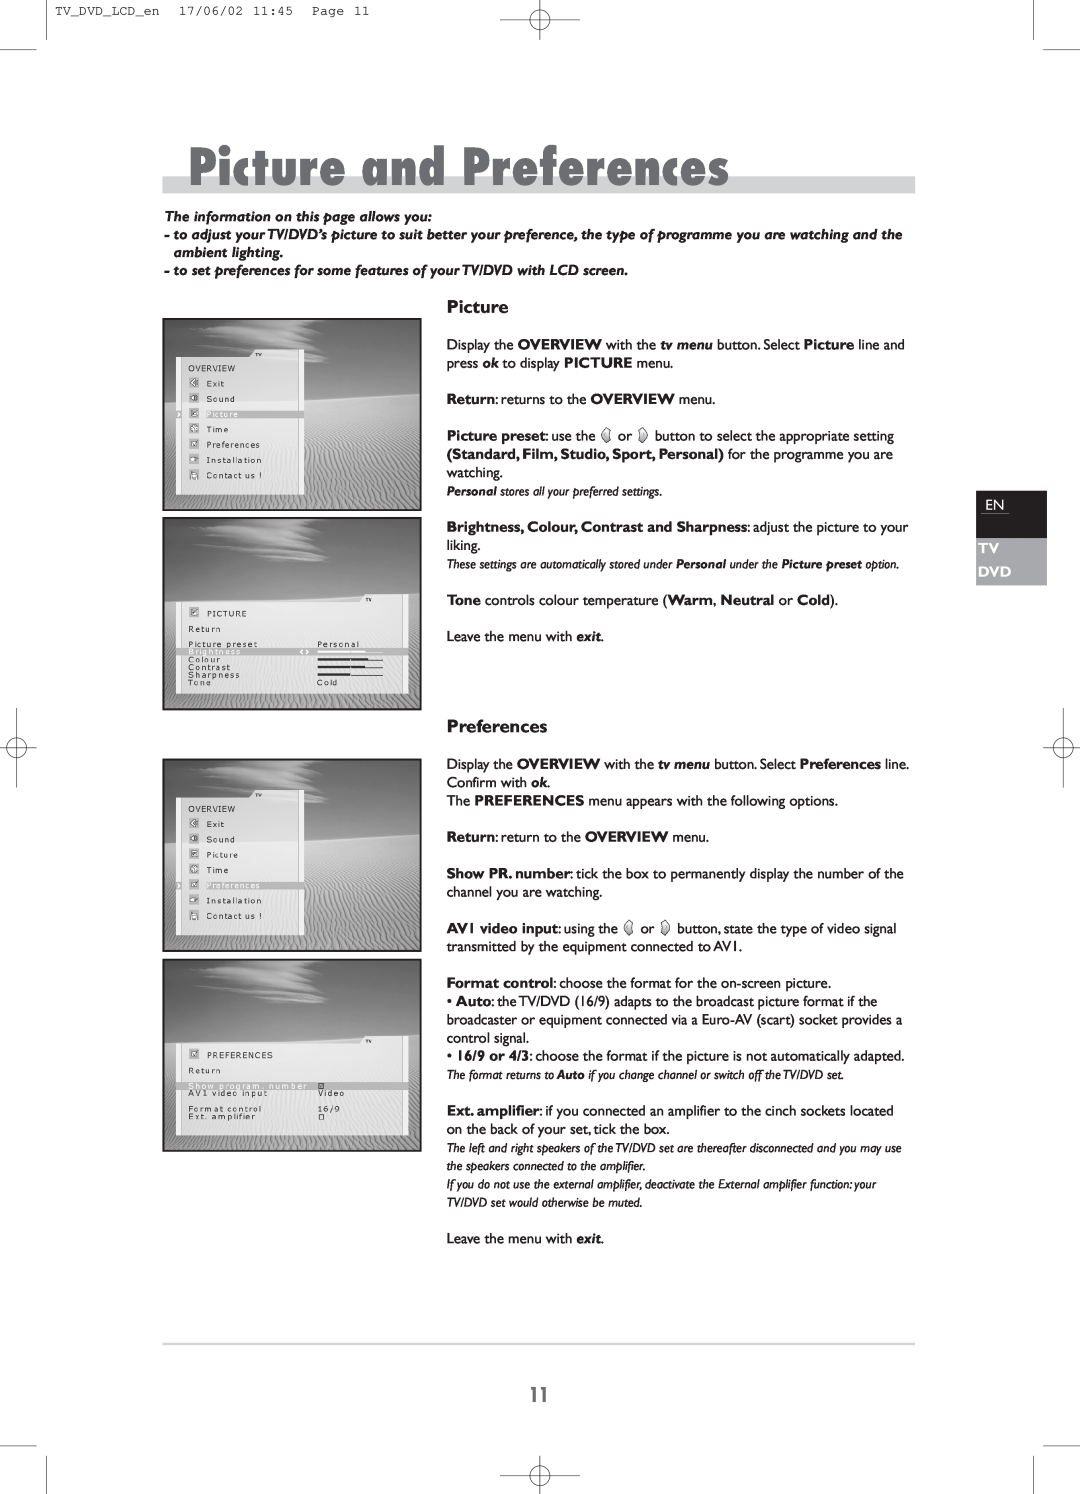 Technicolor - Thomson TV/DVD Combo manual Picture and Preferences, The information on this page allows you, Tv Dvd 